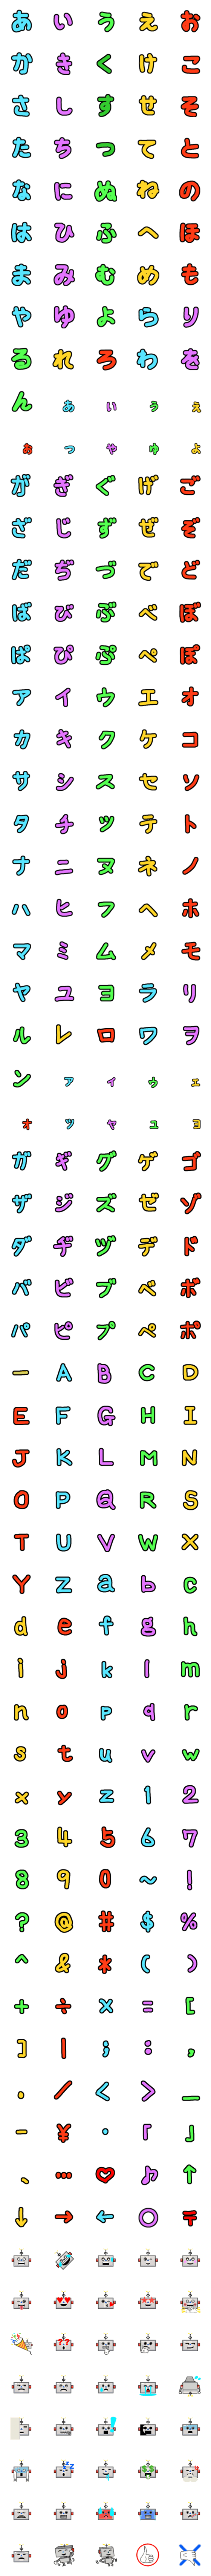 [LINE絵文字]ロボット絵文字の画像一覧